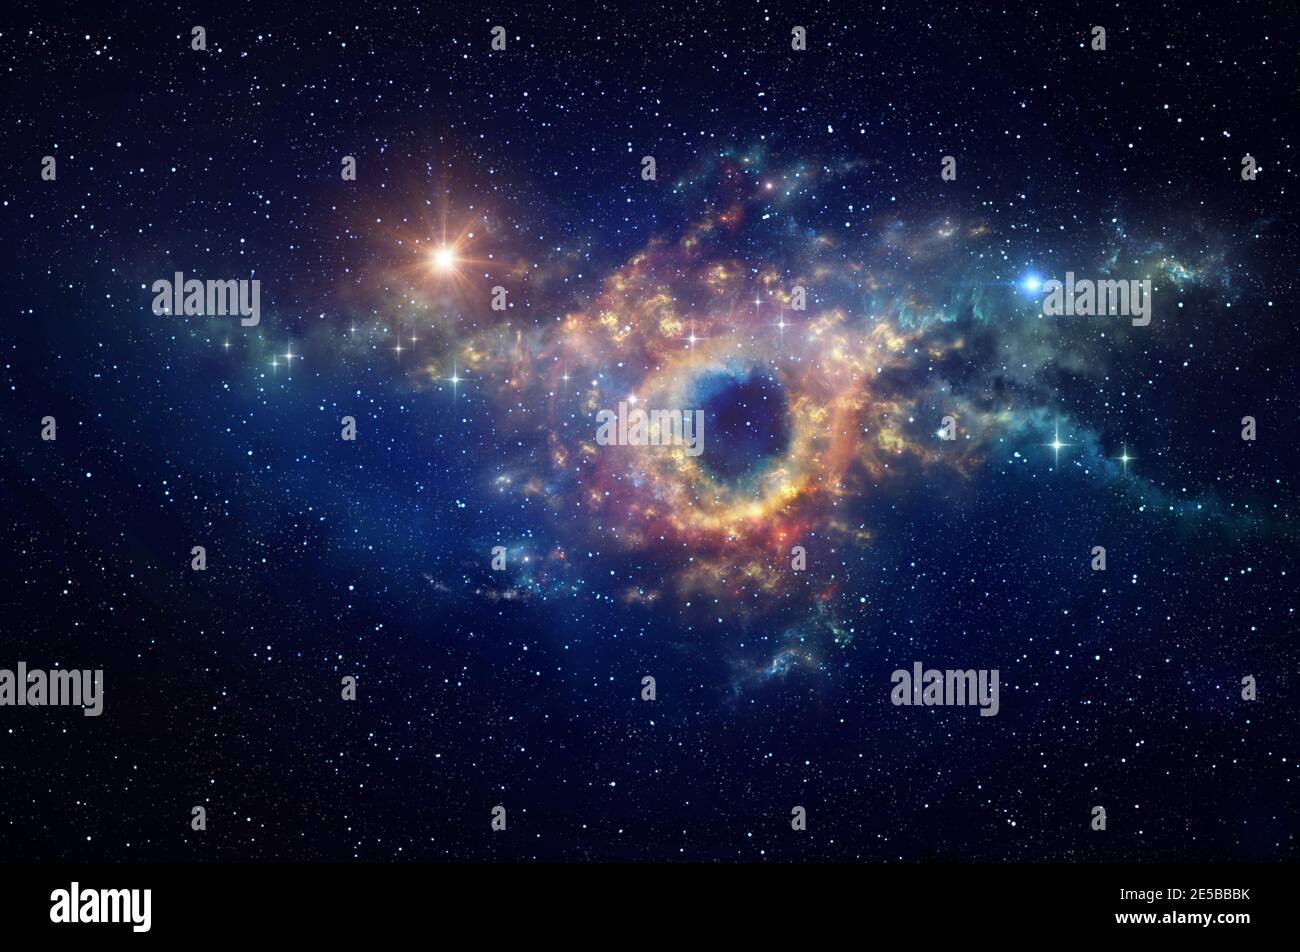 Black hole and cosmic waves into deep space. Nebula at the center of a galaxy clusters in universe. Stars constellations background. Stock Photo